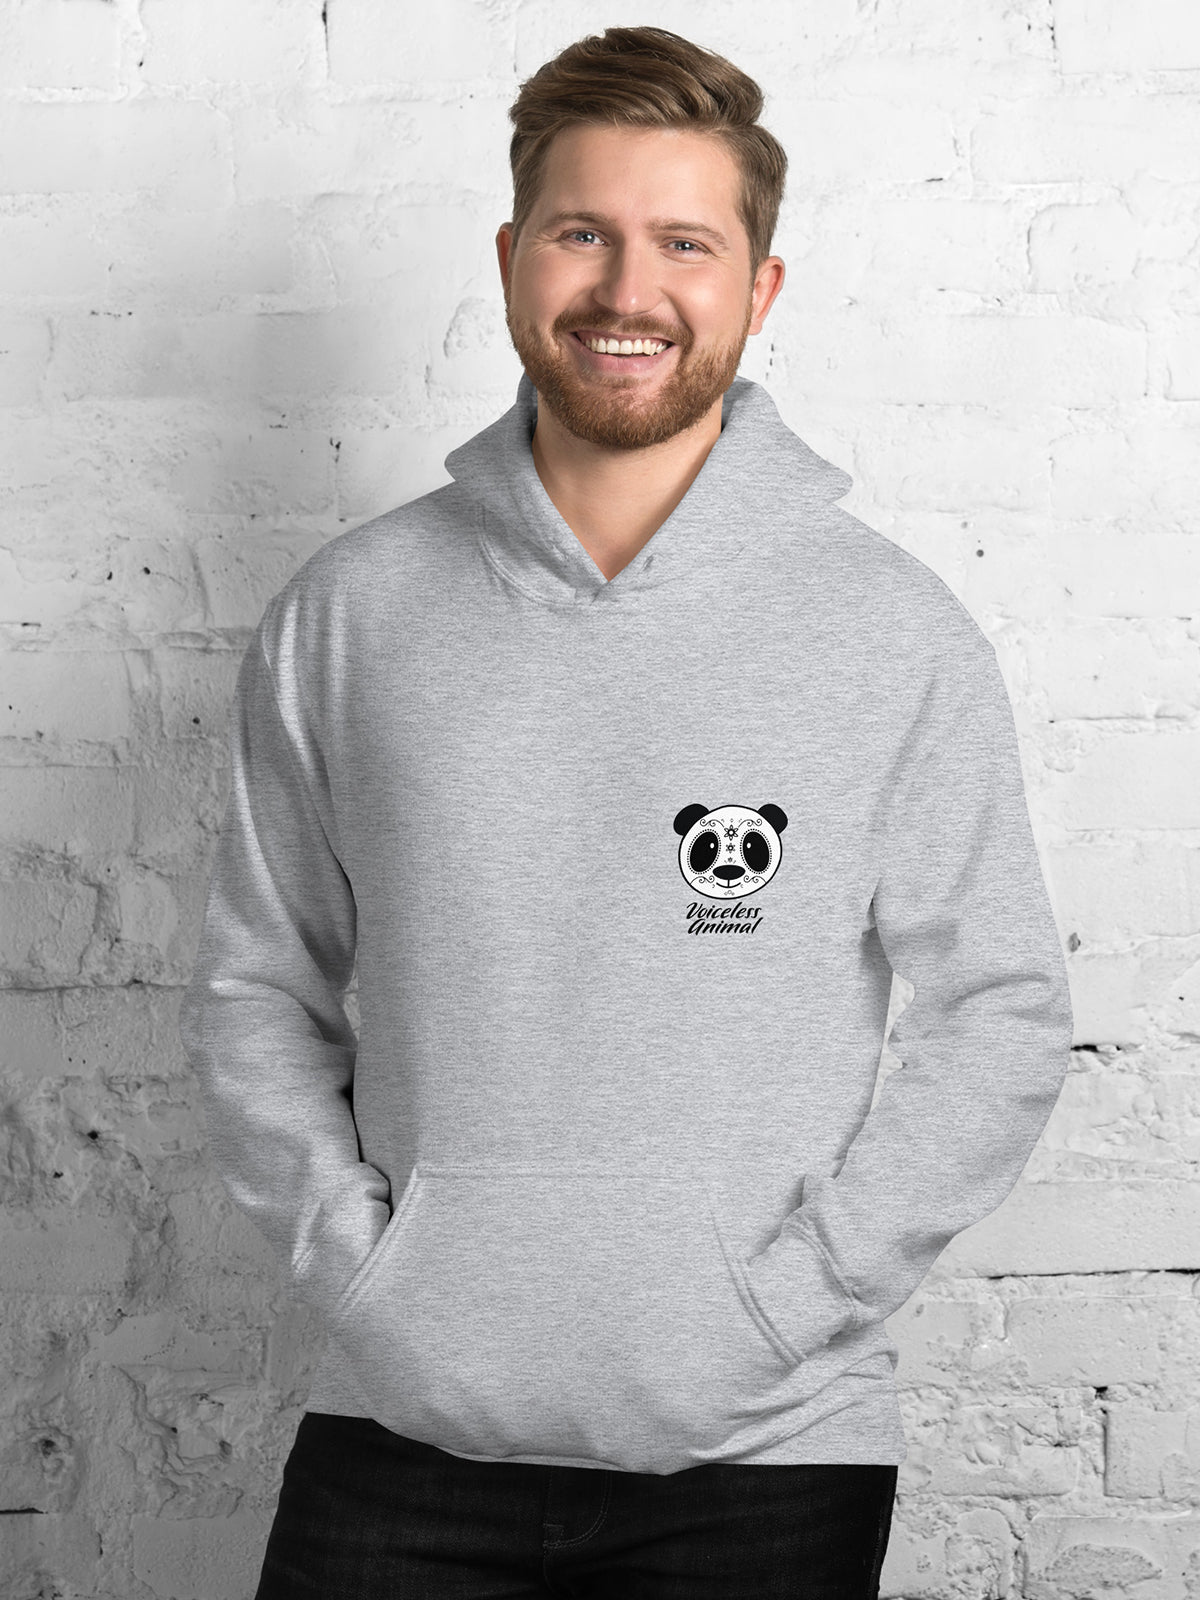 Day Of The Dead Panda - Special Edition Unisex Gray Hoodie